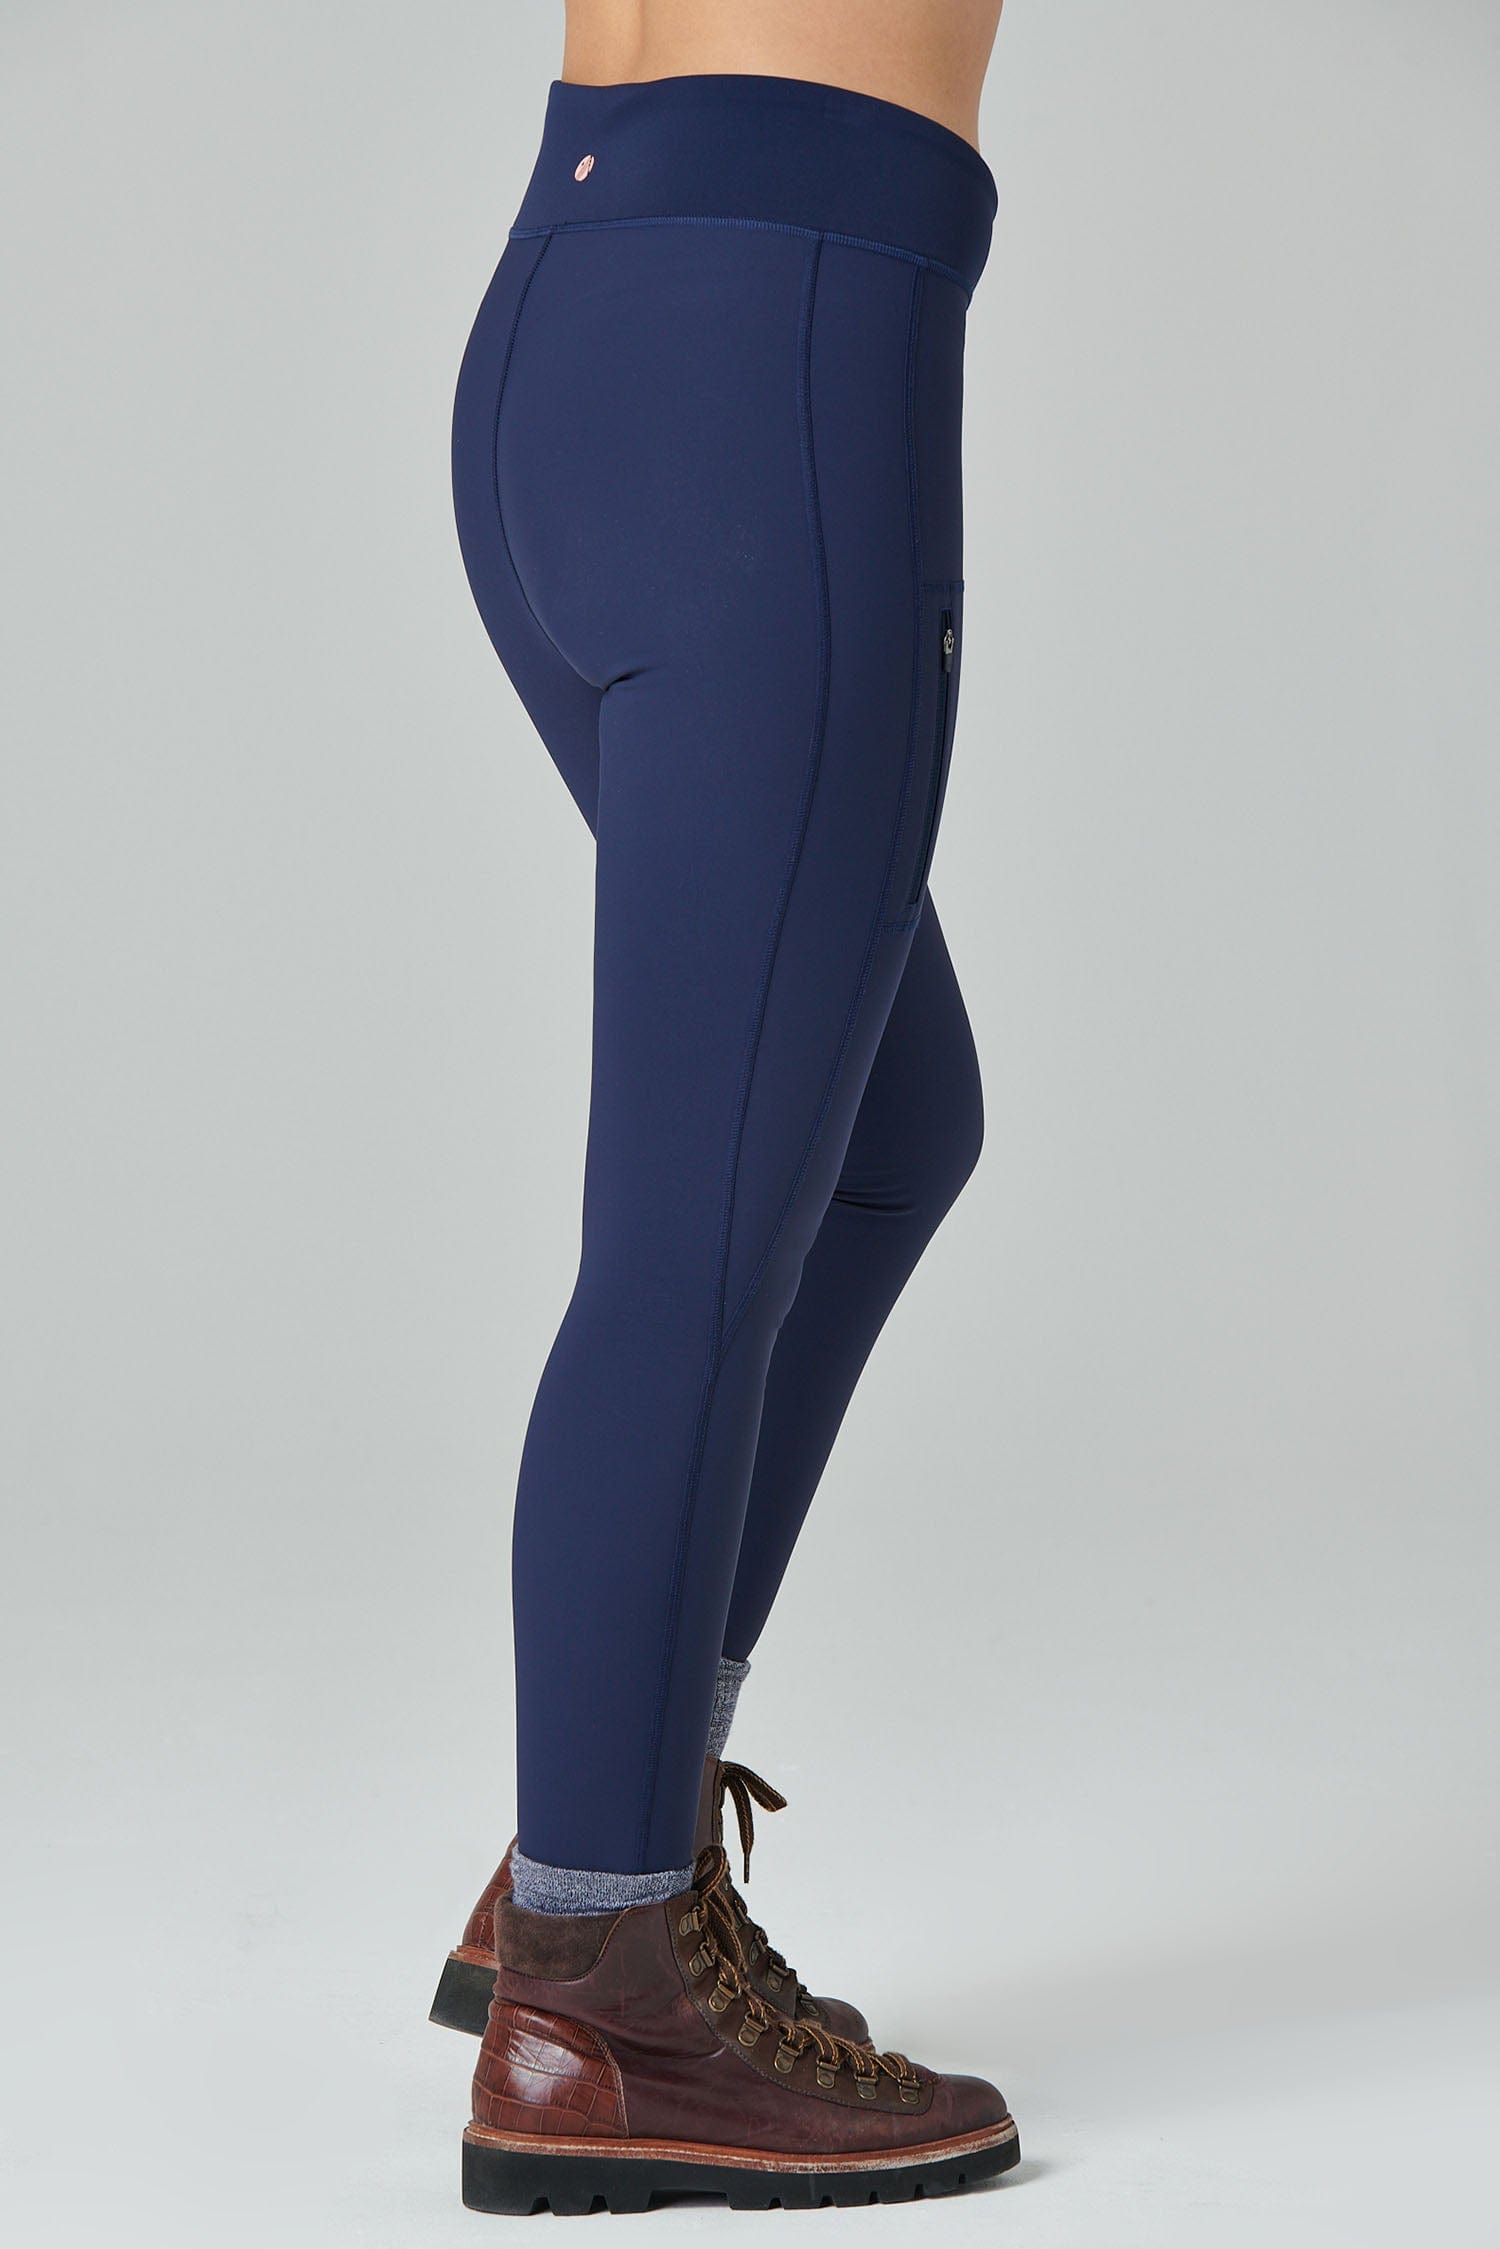 HKM Softshell Leggings Heat - Navy - Horse and Rider Supplies